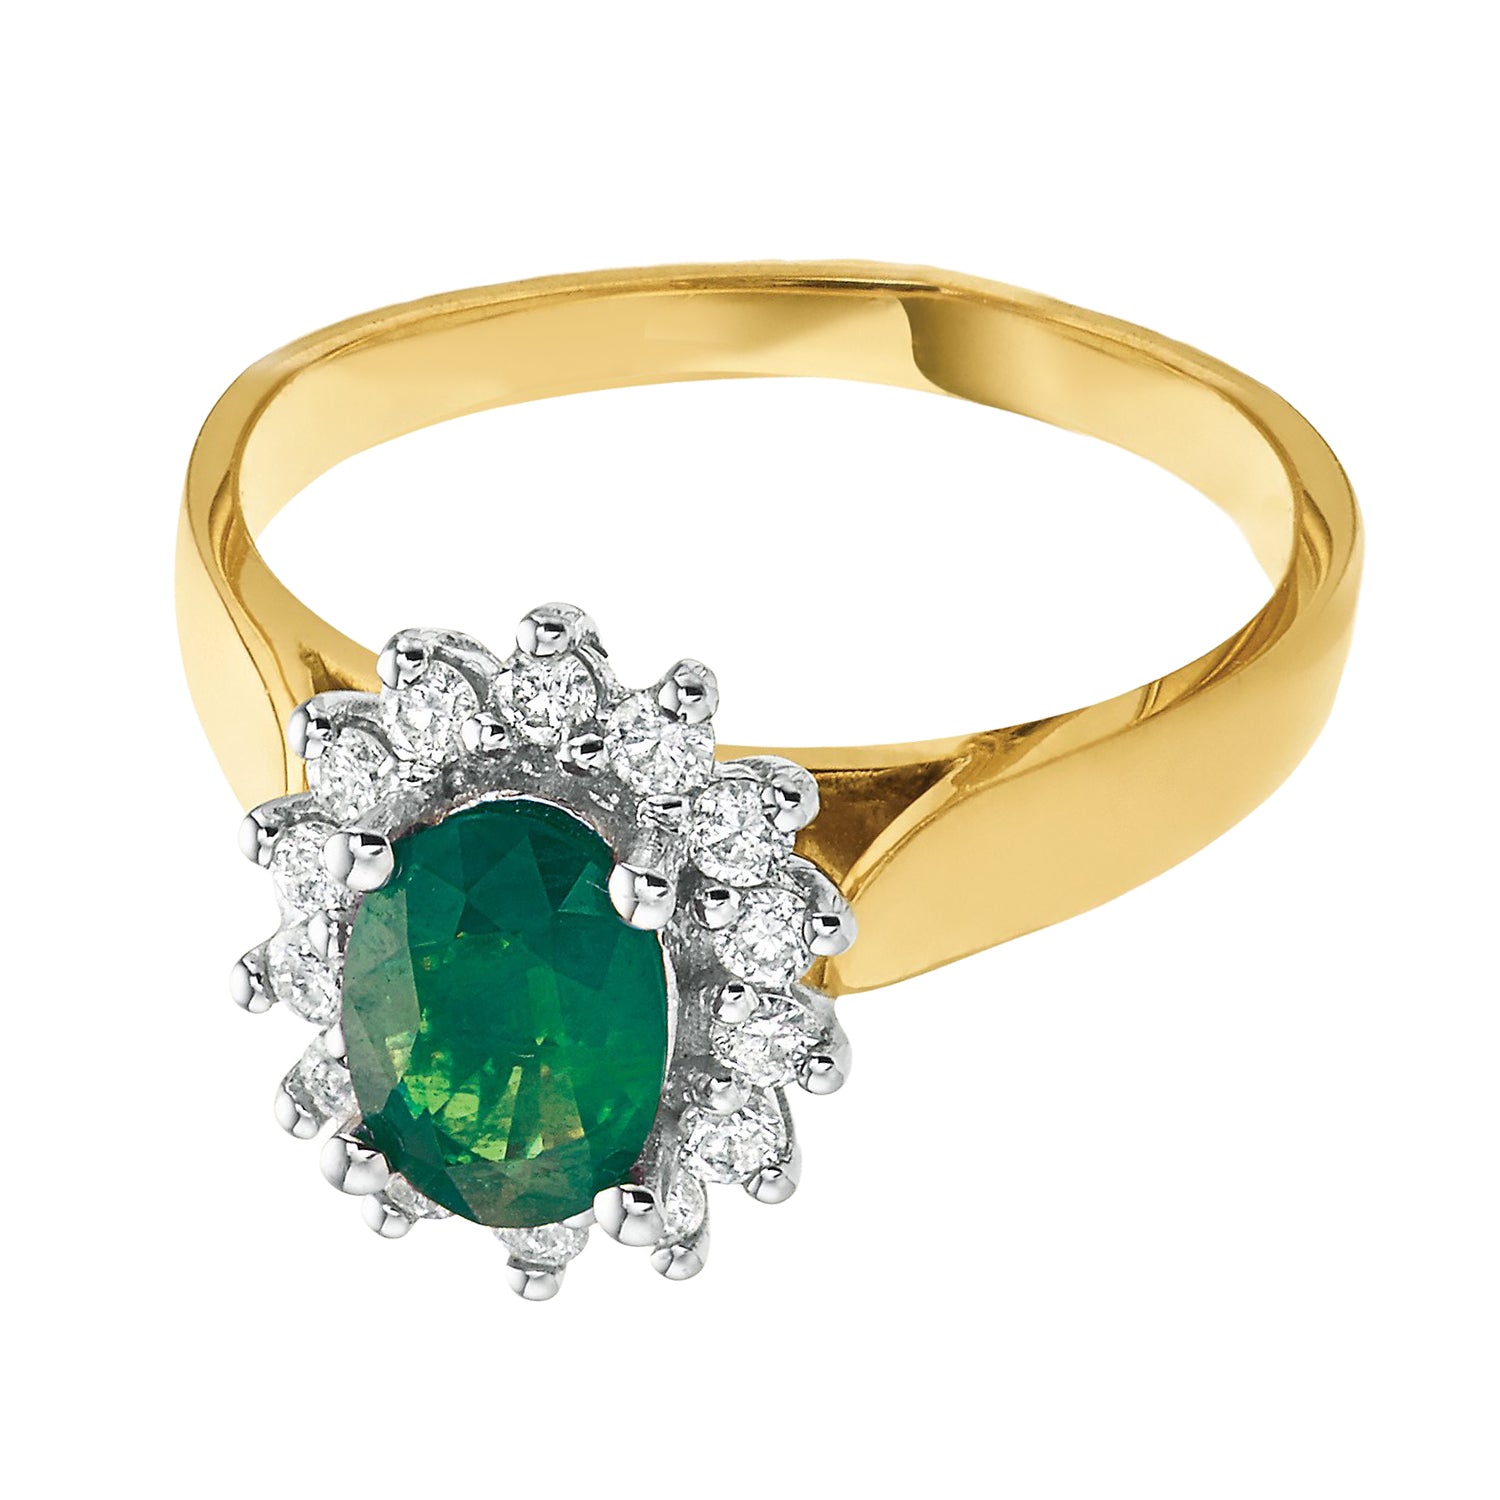 Emerald by love - Colombian Emerald ring in 18k white gold by Emerald by  Love